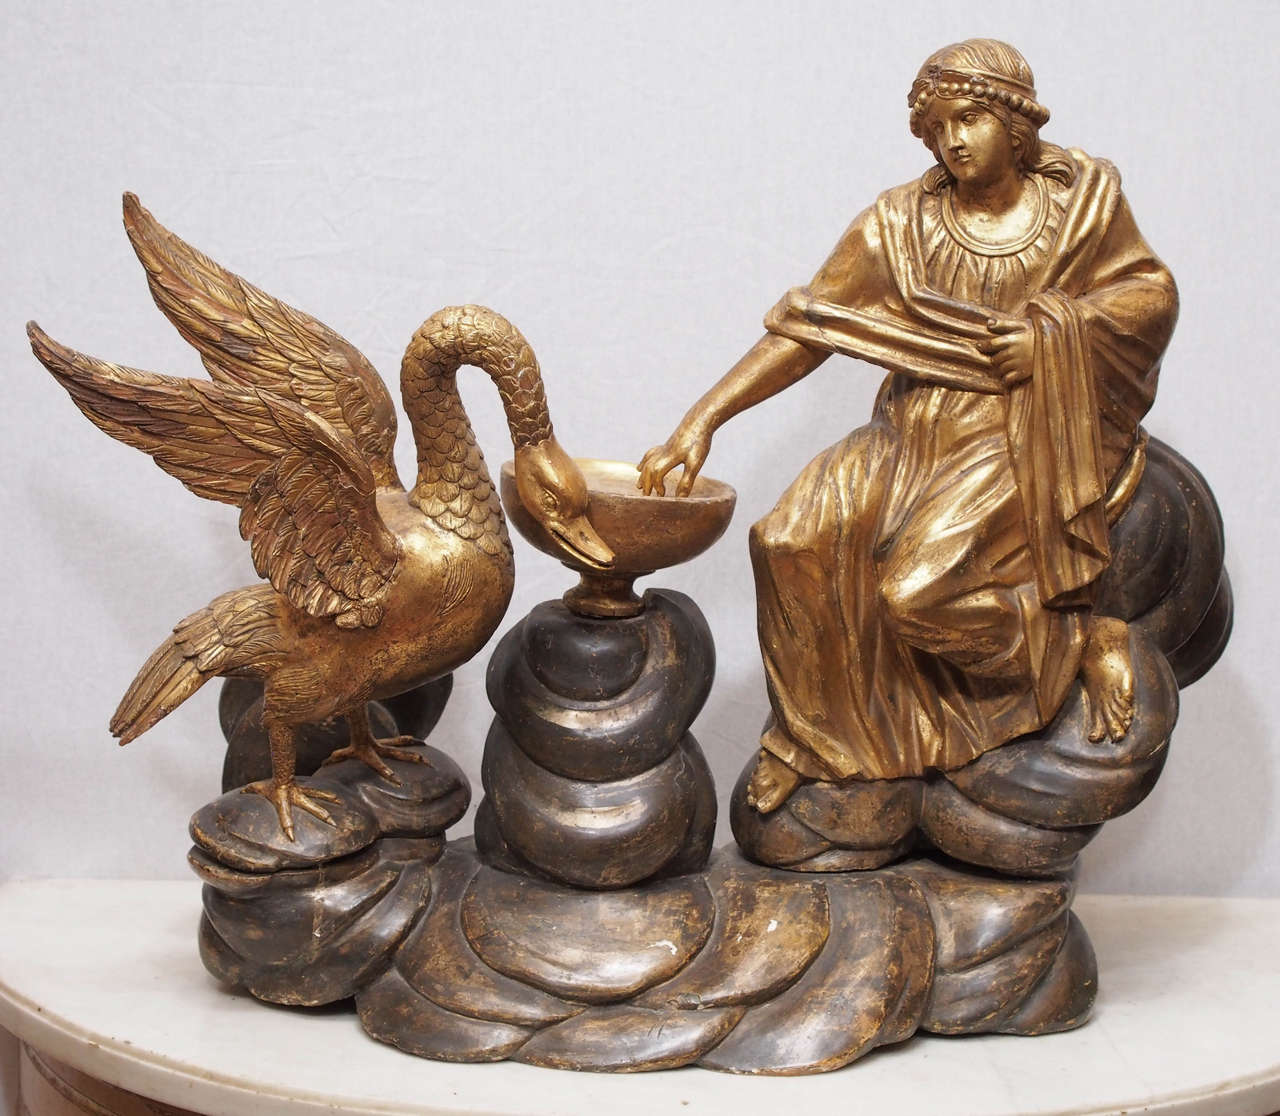 Exceptional carved Gilt Wood Grouping of Led and The Swan with a water basin and a silver gilt Cloud Base.